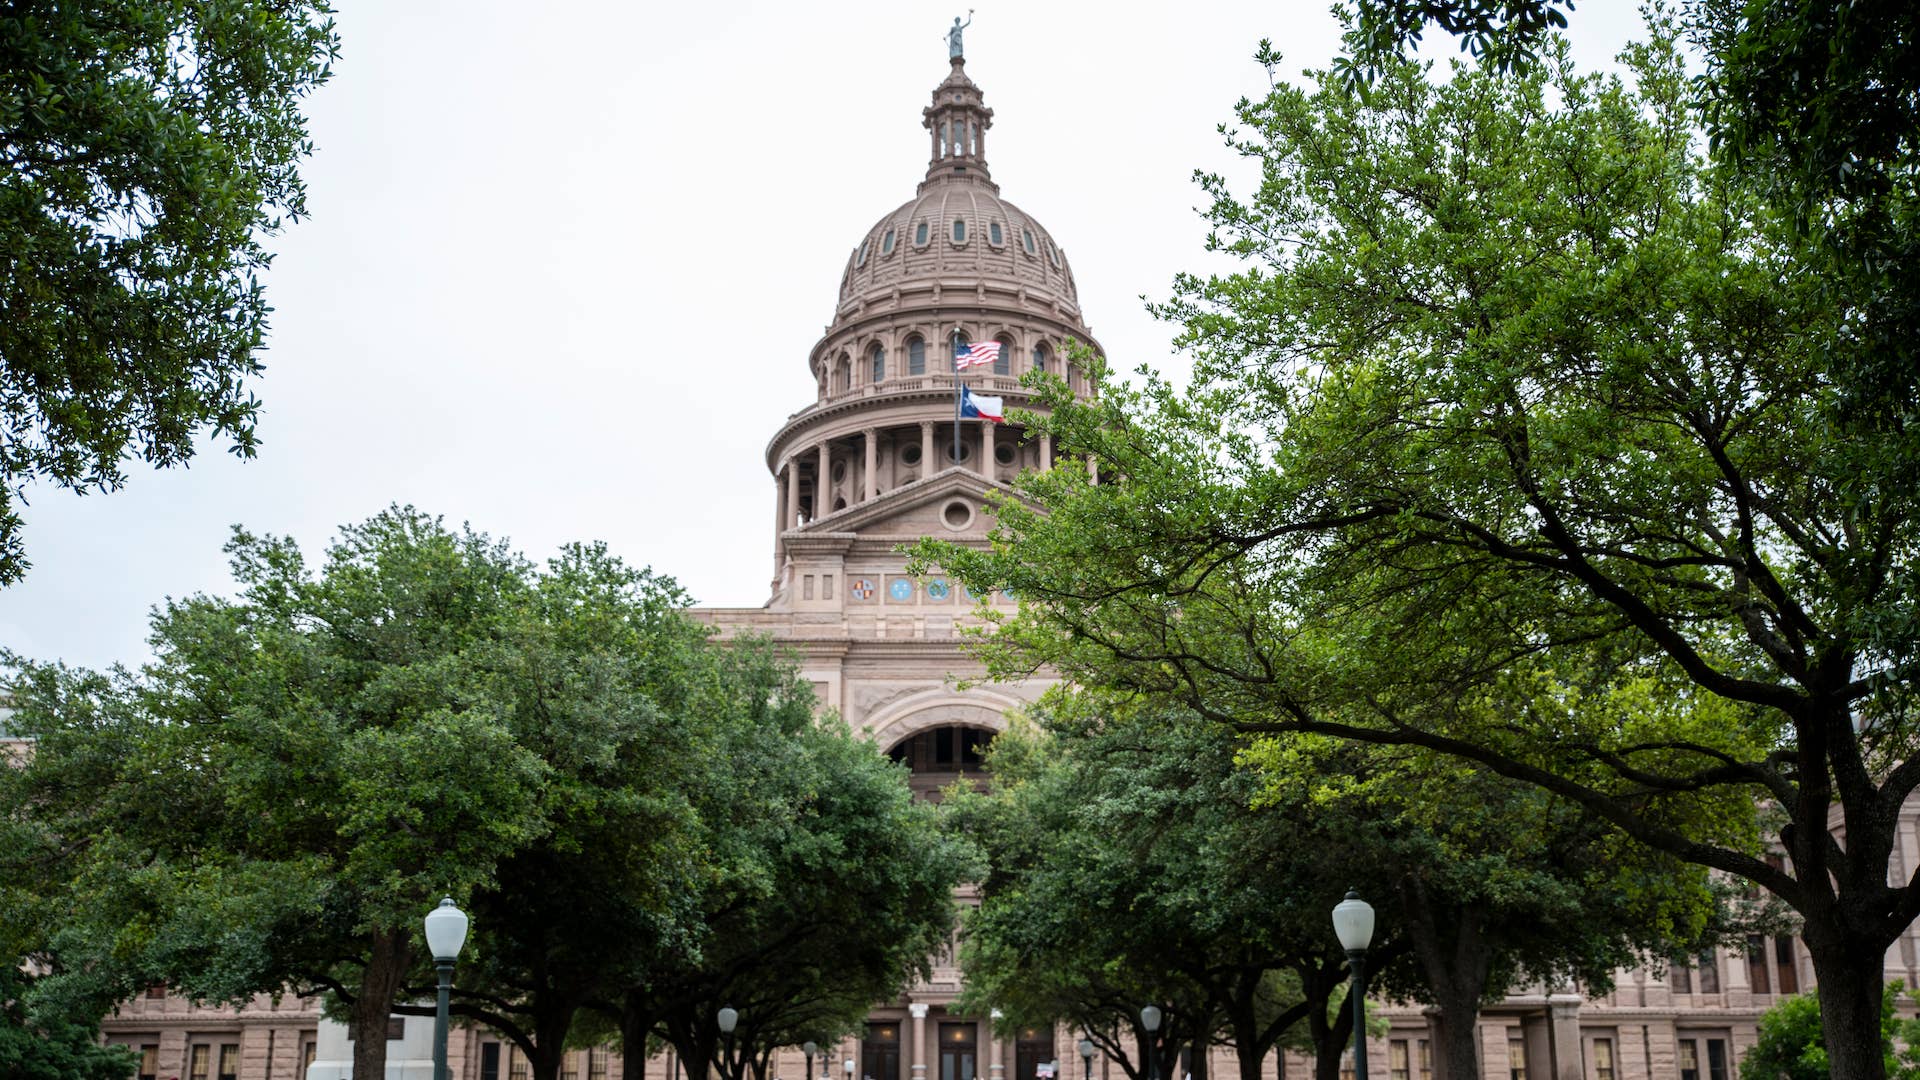 Photograph of Texas Capitol Building in Austin